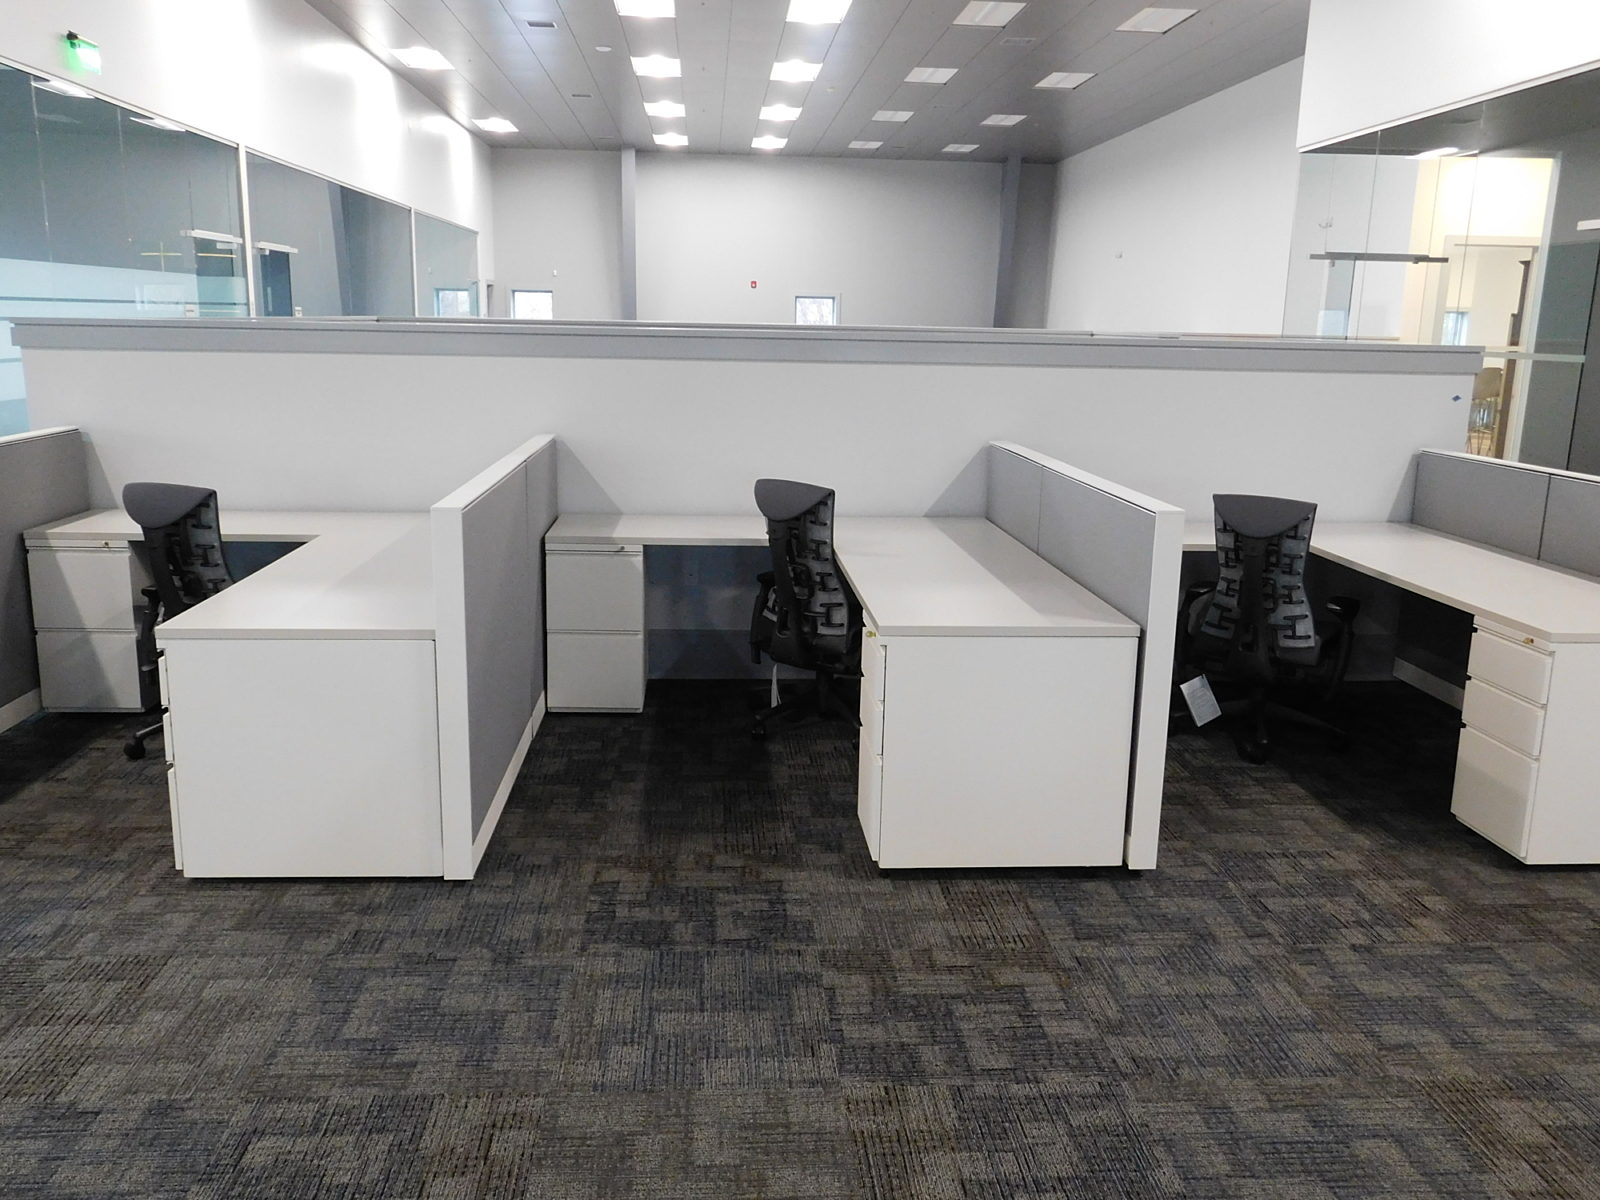 Herman Miller L-shape workstations with white storage and surfaces, grey fabric panels, Embody chairs